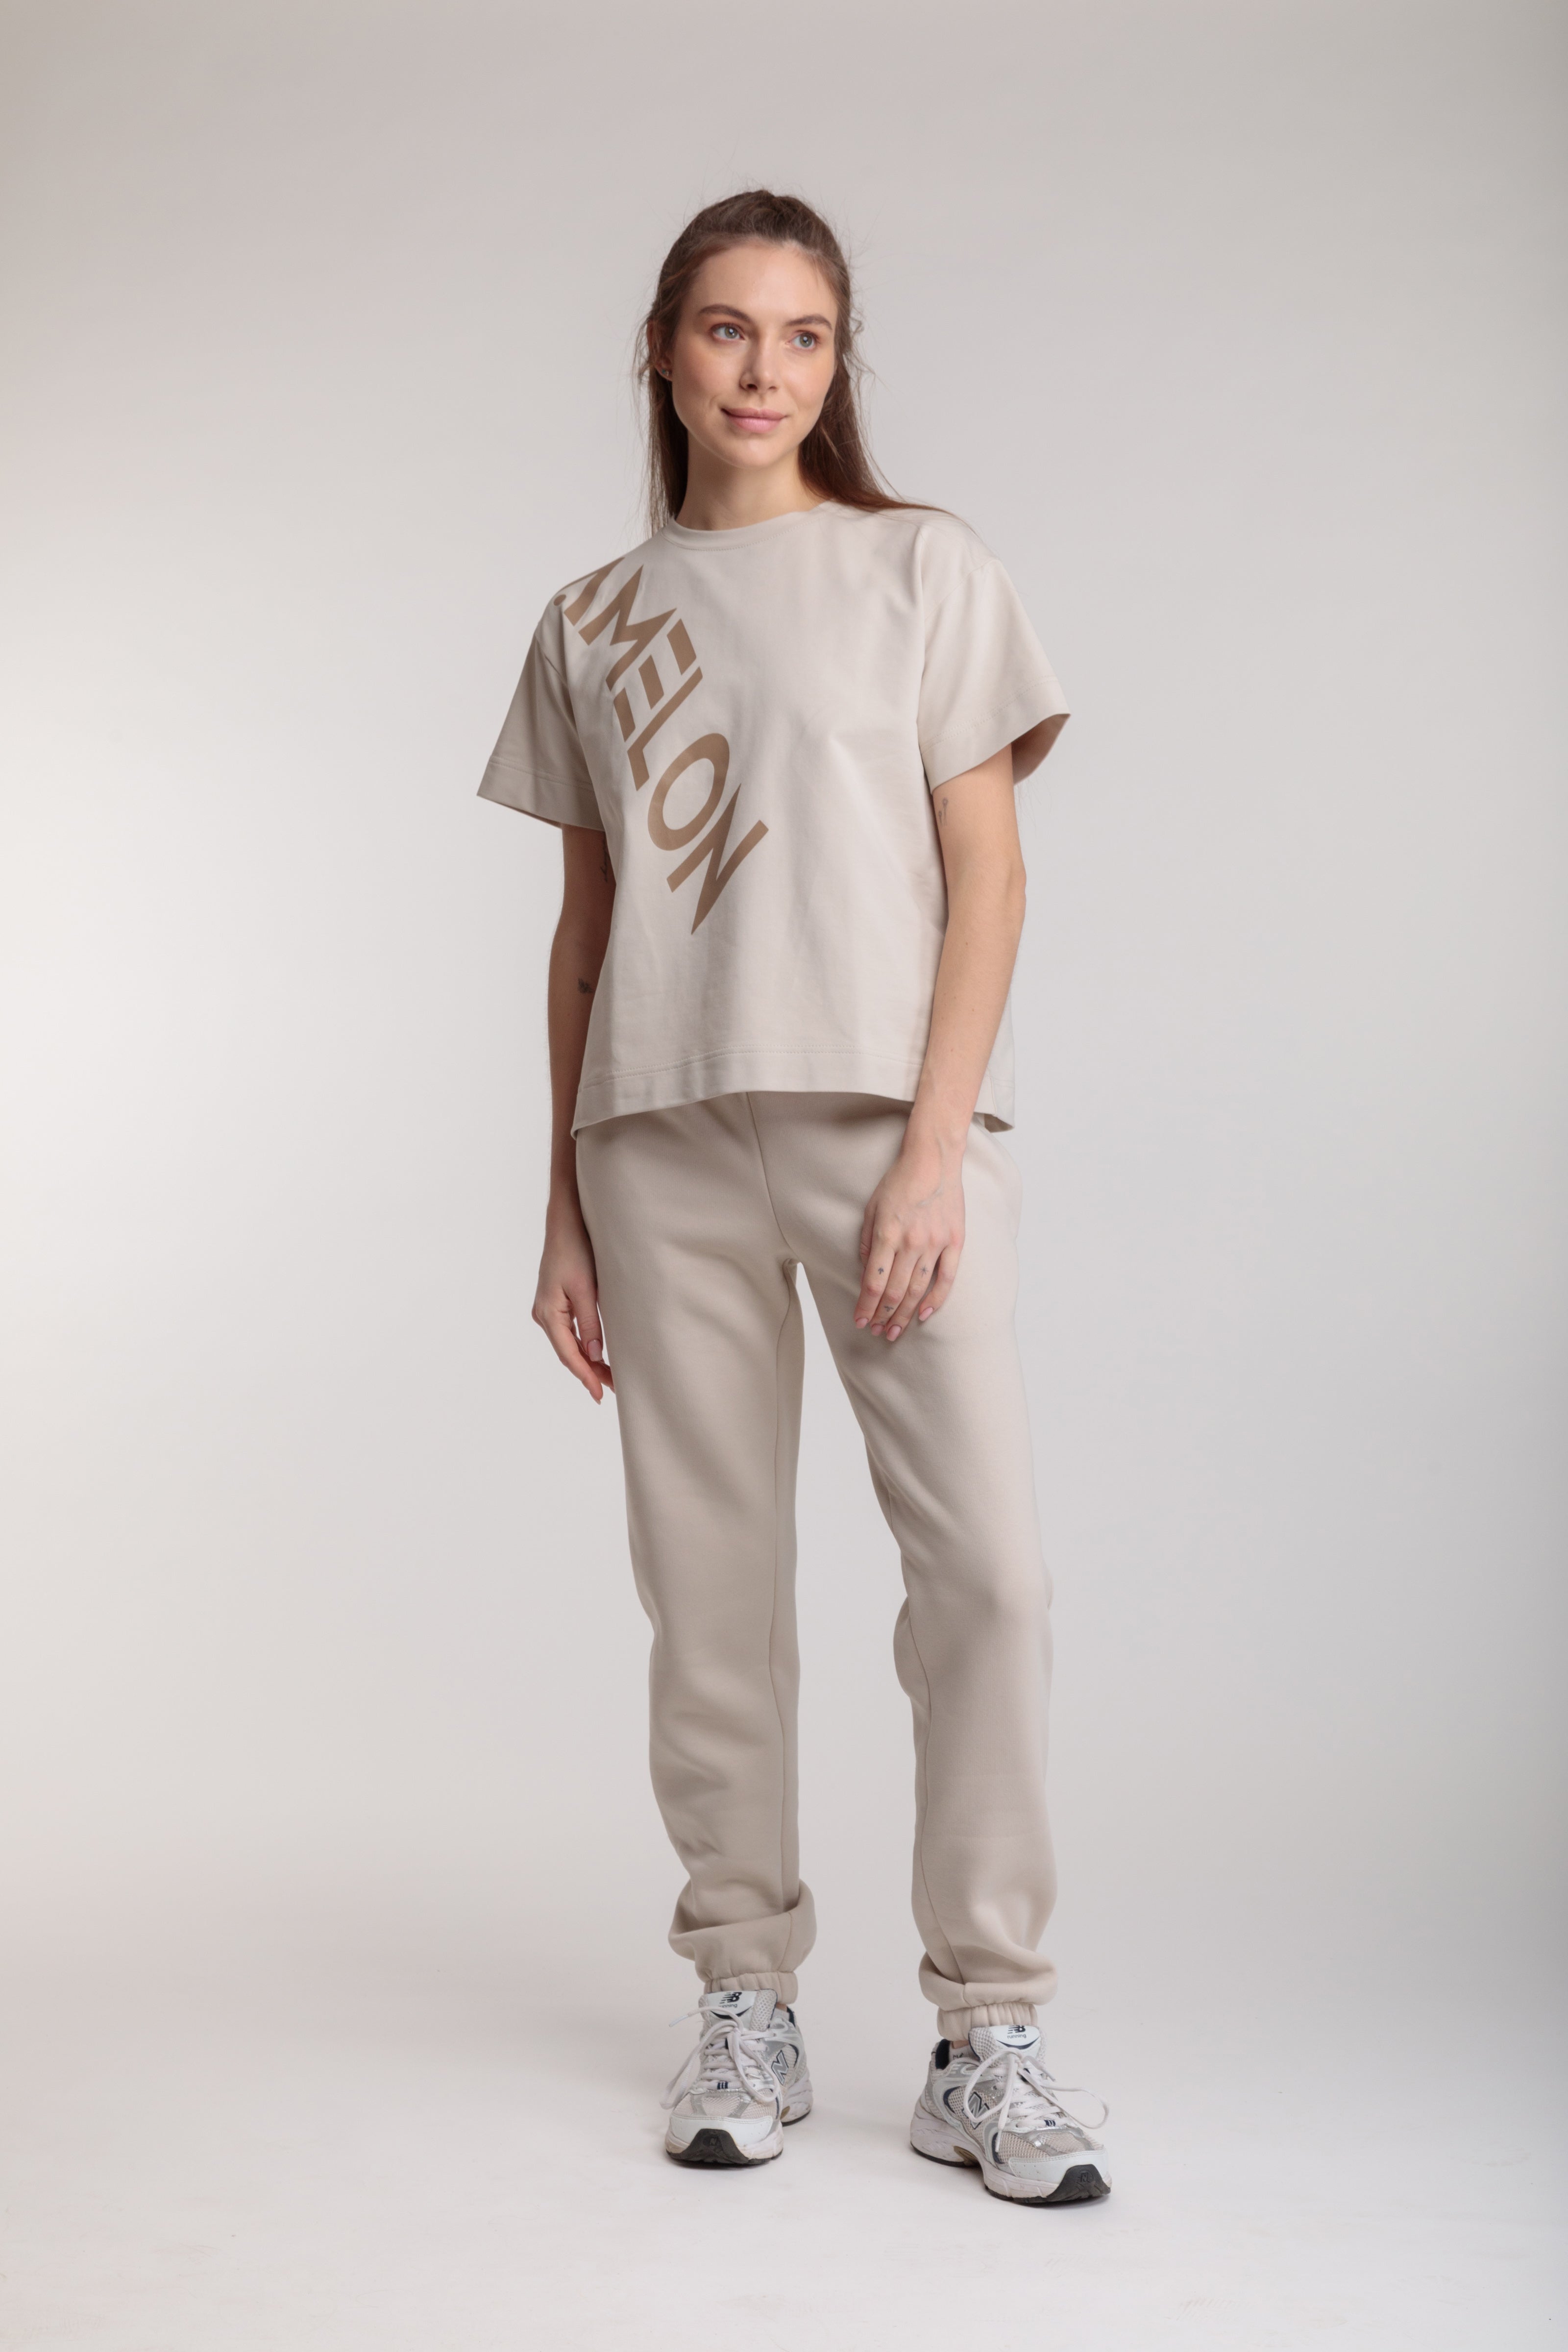 Women's jogger pants in milky color